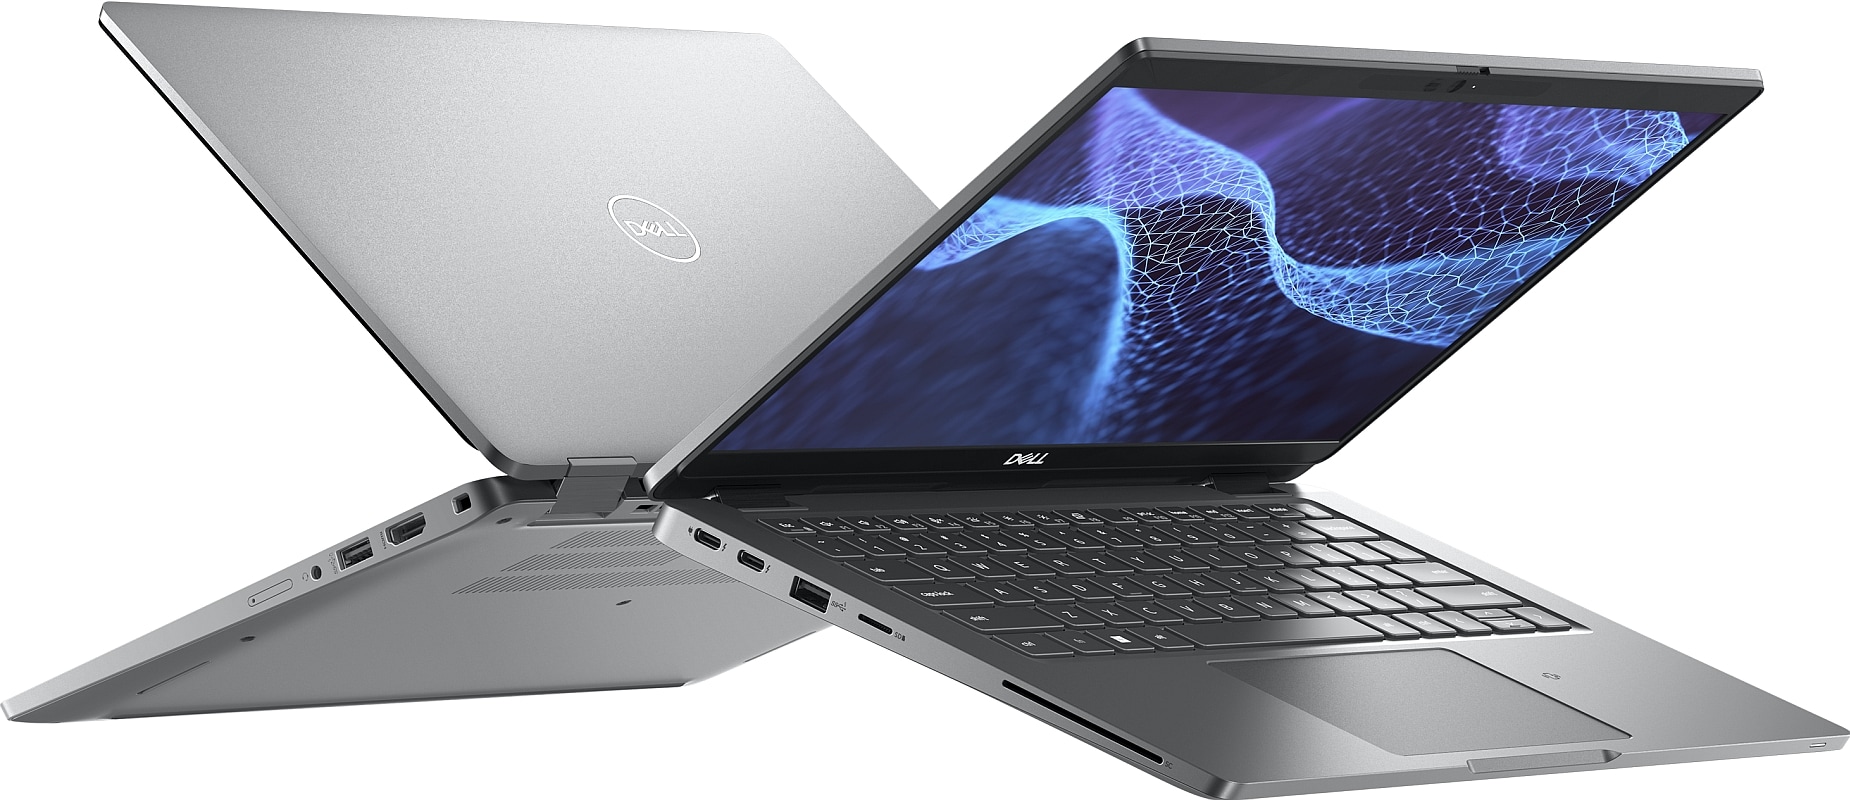 Dell Latitude 5430 Price (21 Mar 2023) Specification & Reviews । Dell Laptops